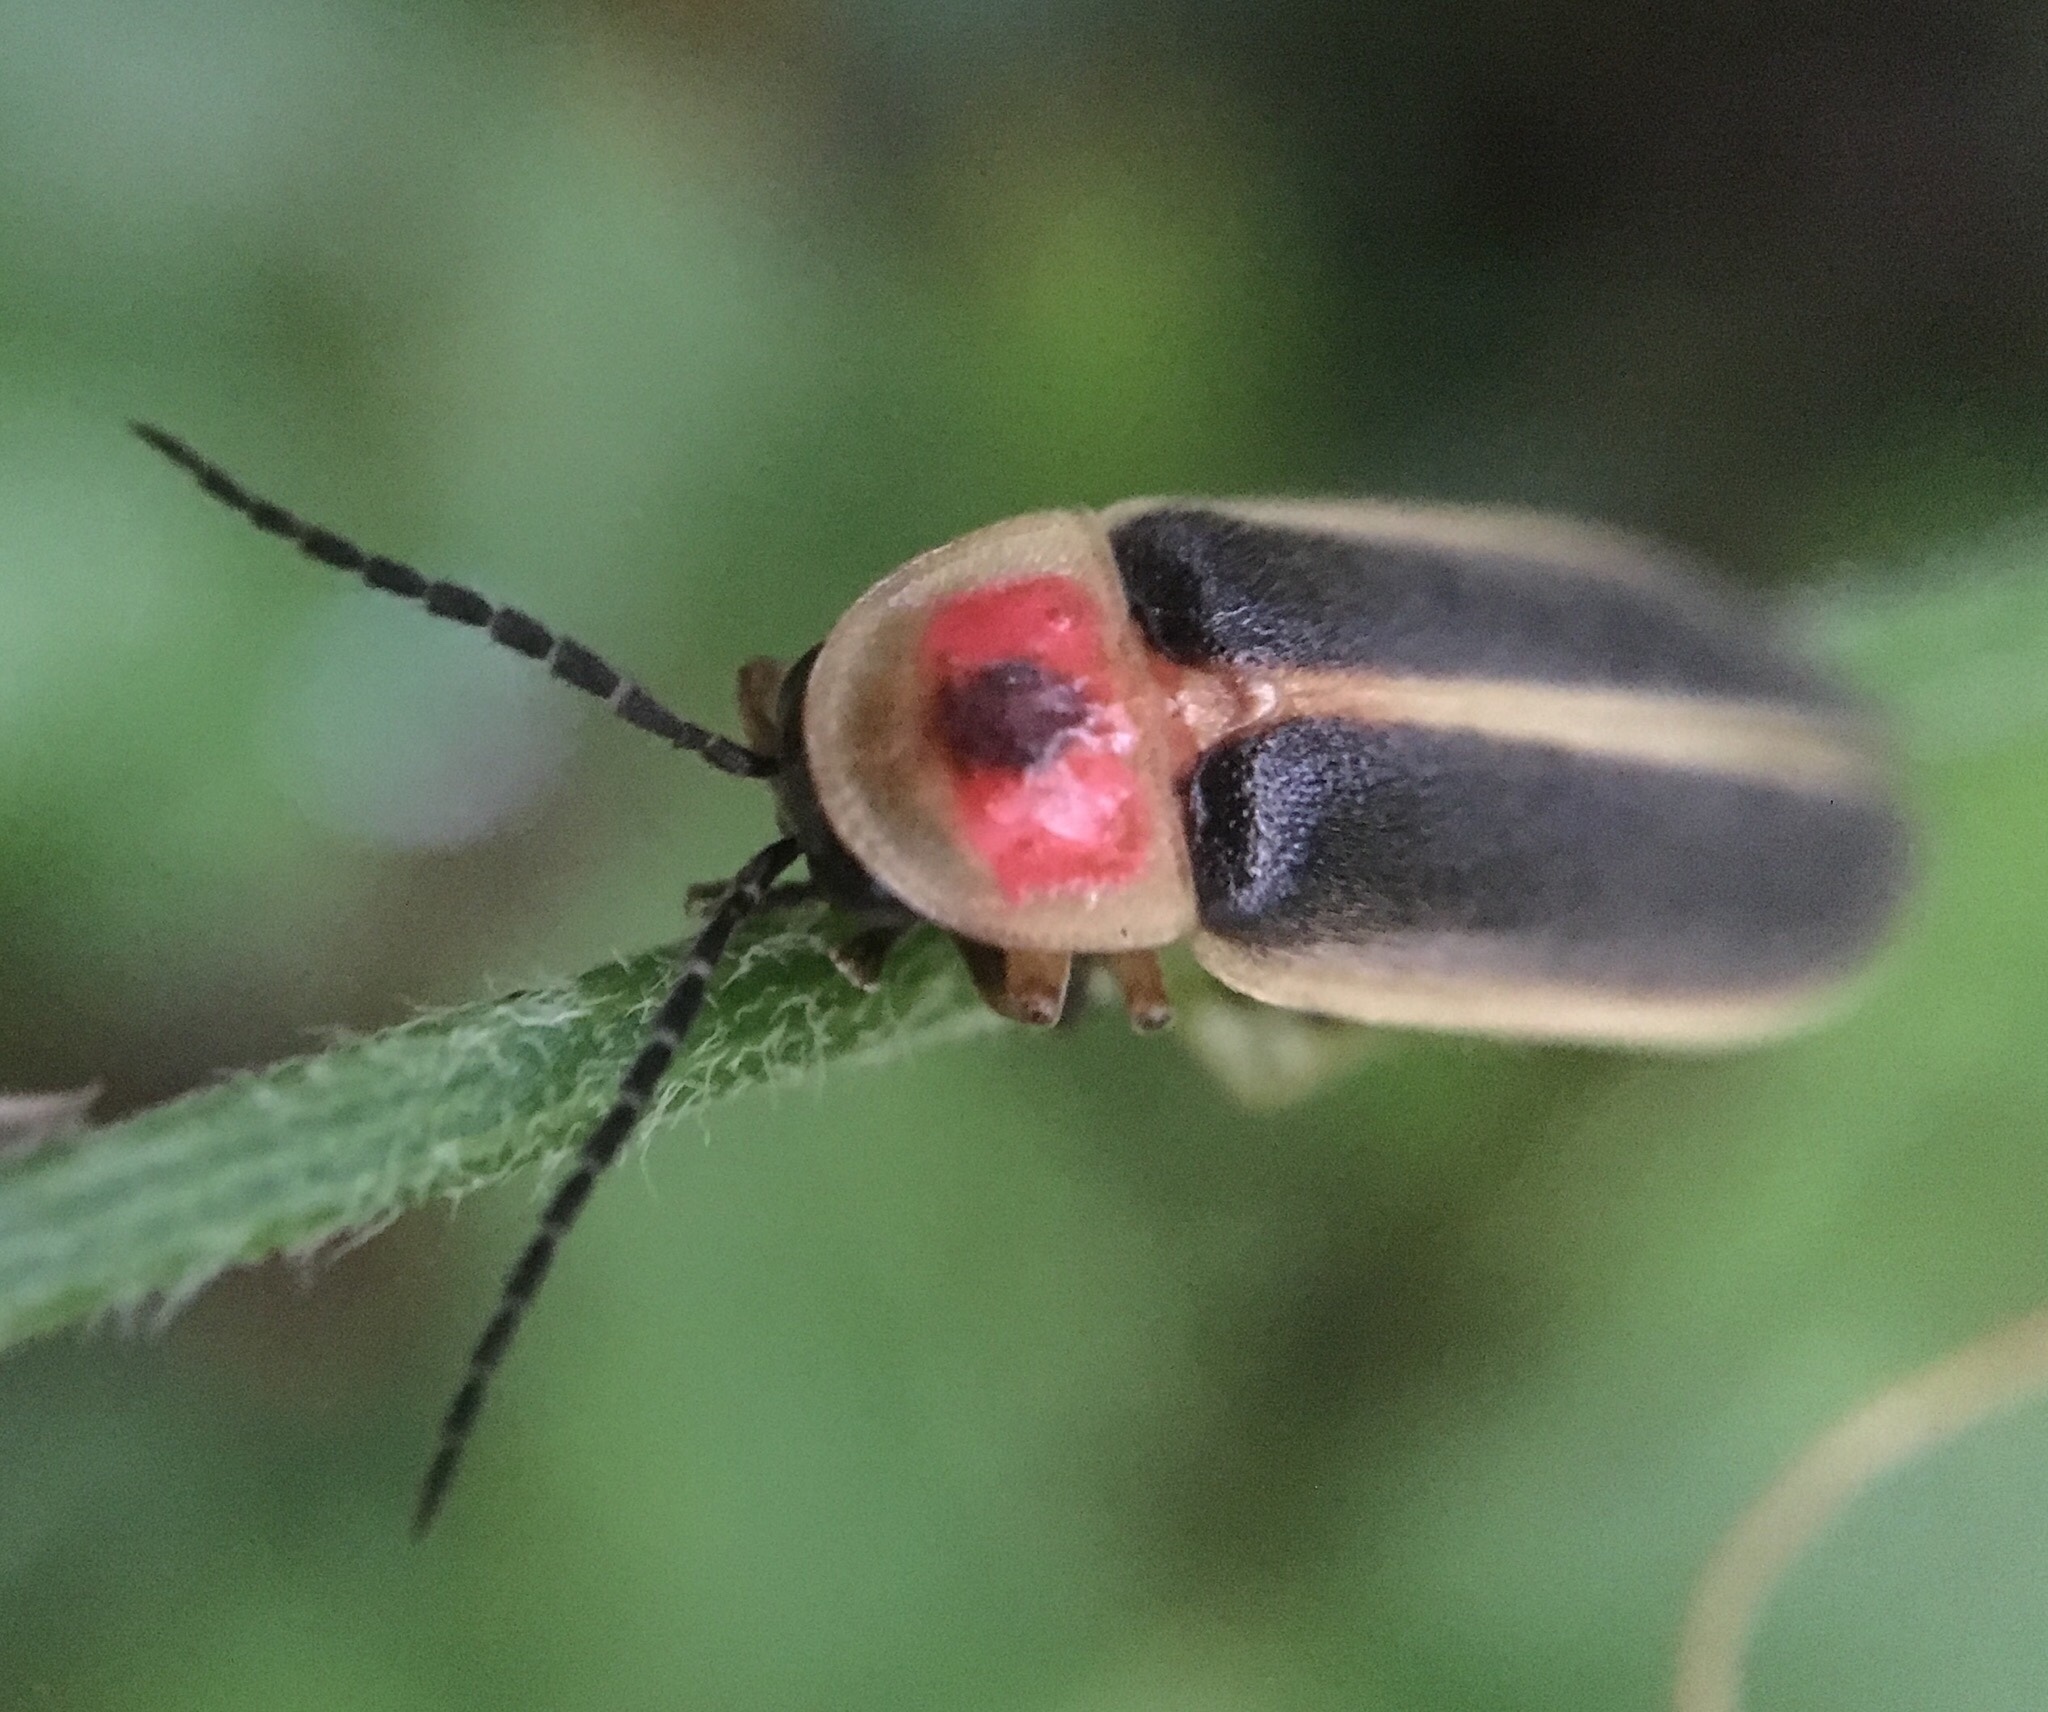 In daylight, most fireflies don't look so magical. This big dipper firefly is mostly black, with pale brown  margins to it's body and a red patch on the top of it's thorax.